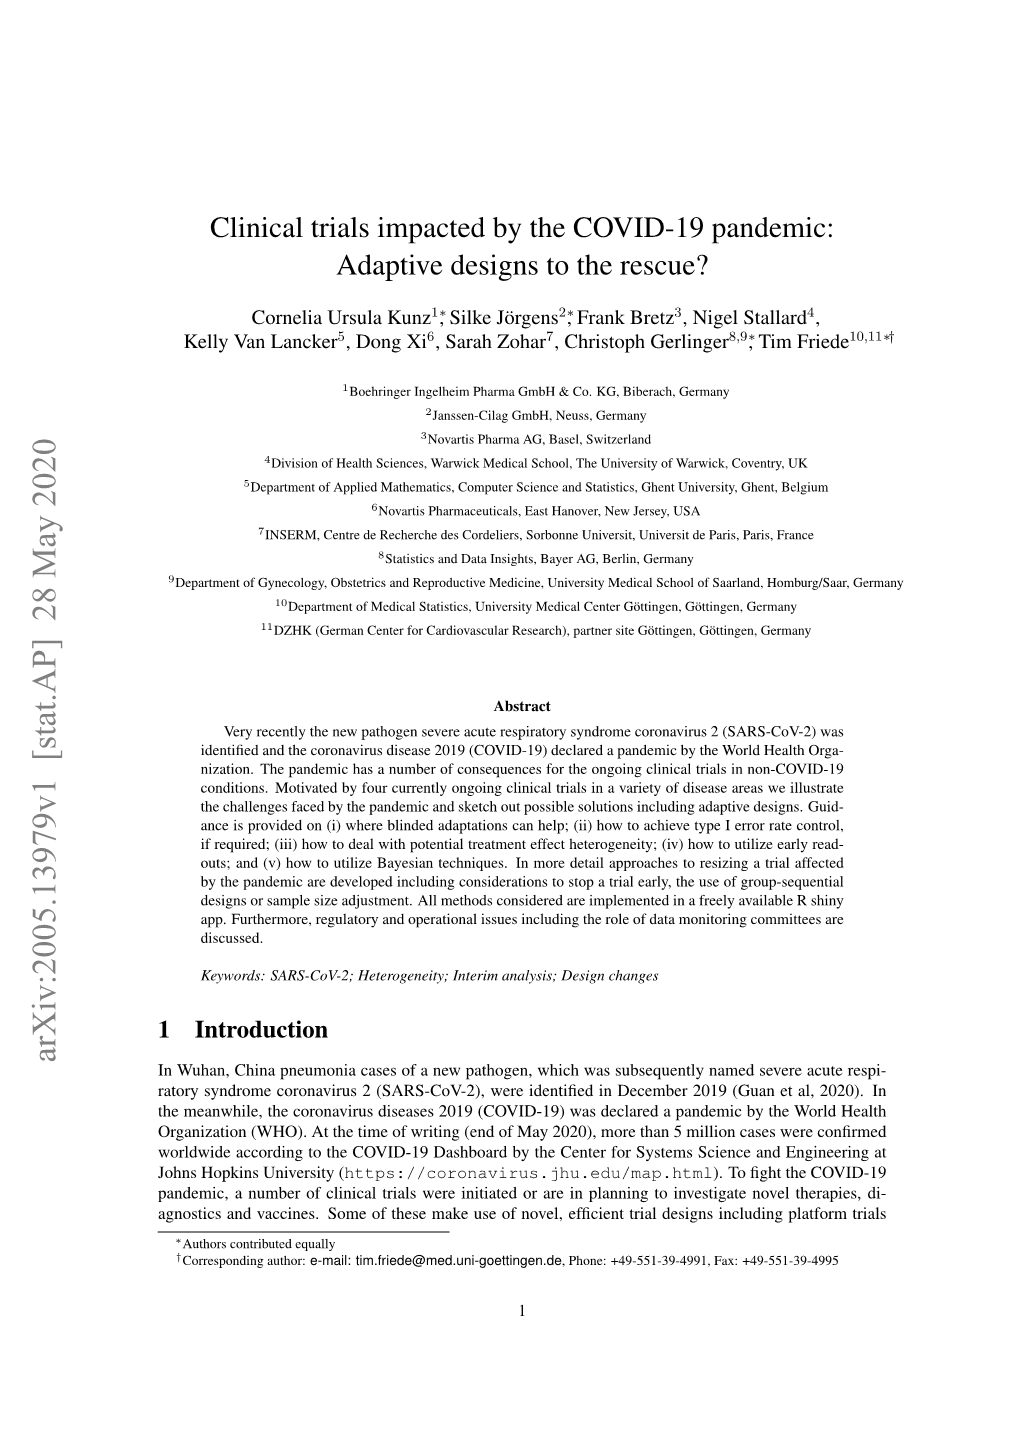 Clinical Trials Impacted by the COVID-19 Pandemic: Adaptive Designs to the Rescue?